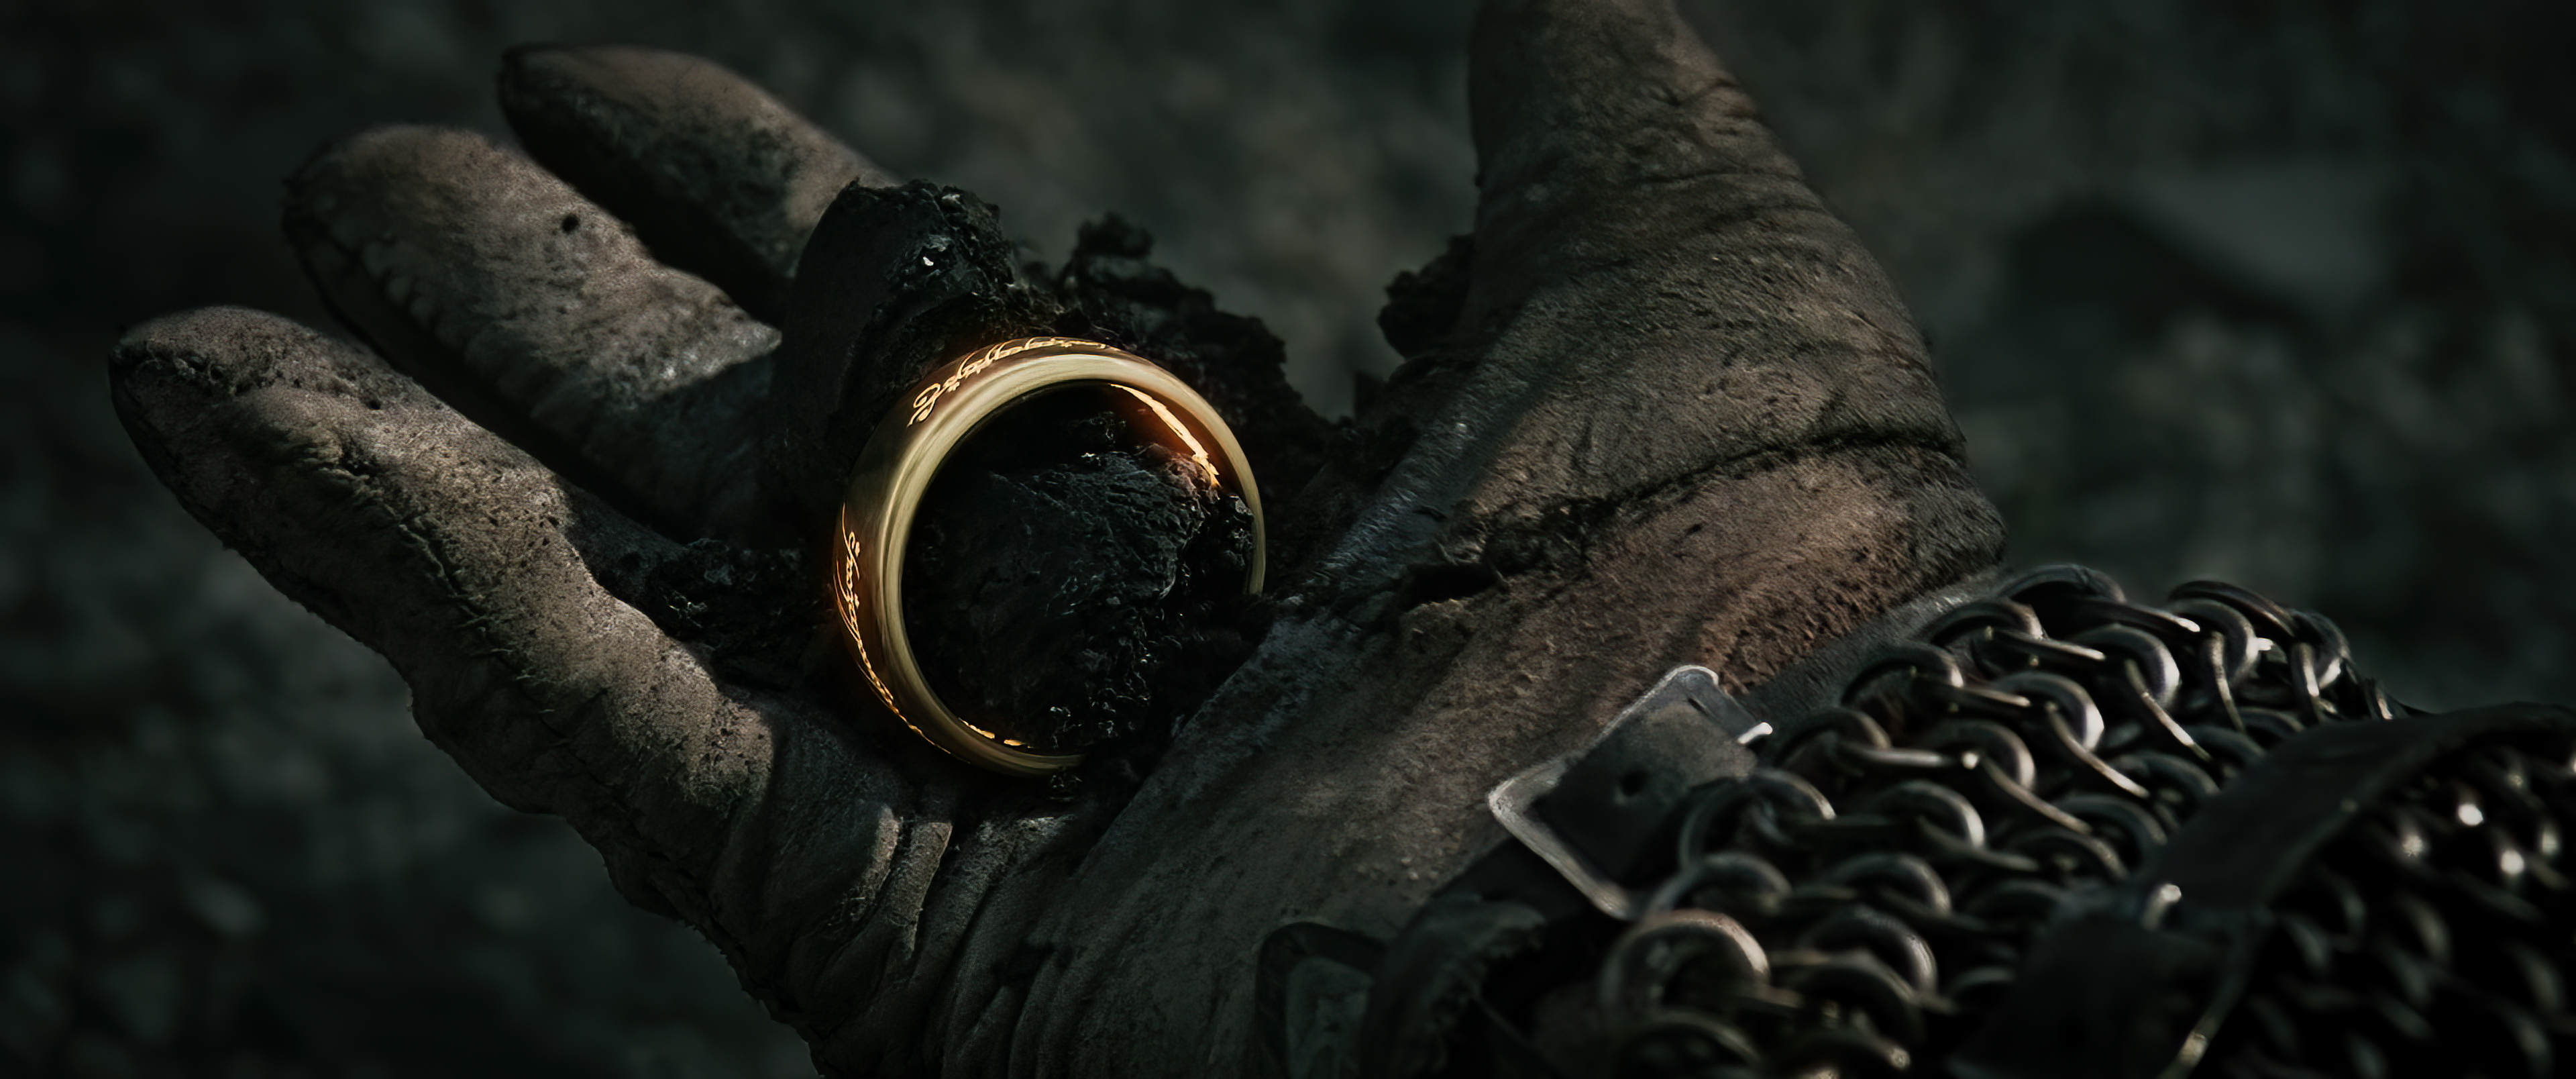 General 3840x1608 The Lord of the Rings: The Fellowship of the Ring The One Ring The War of the Last Alliance Siege of Barad-dûr Isildur Mordor Middle-Earth Topaz DeNoise AI J. R. R. Tolkien Peter Jackson movies hands gloves rings king armor closeup